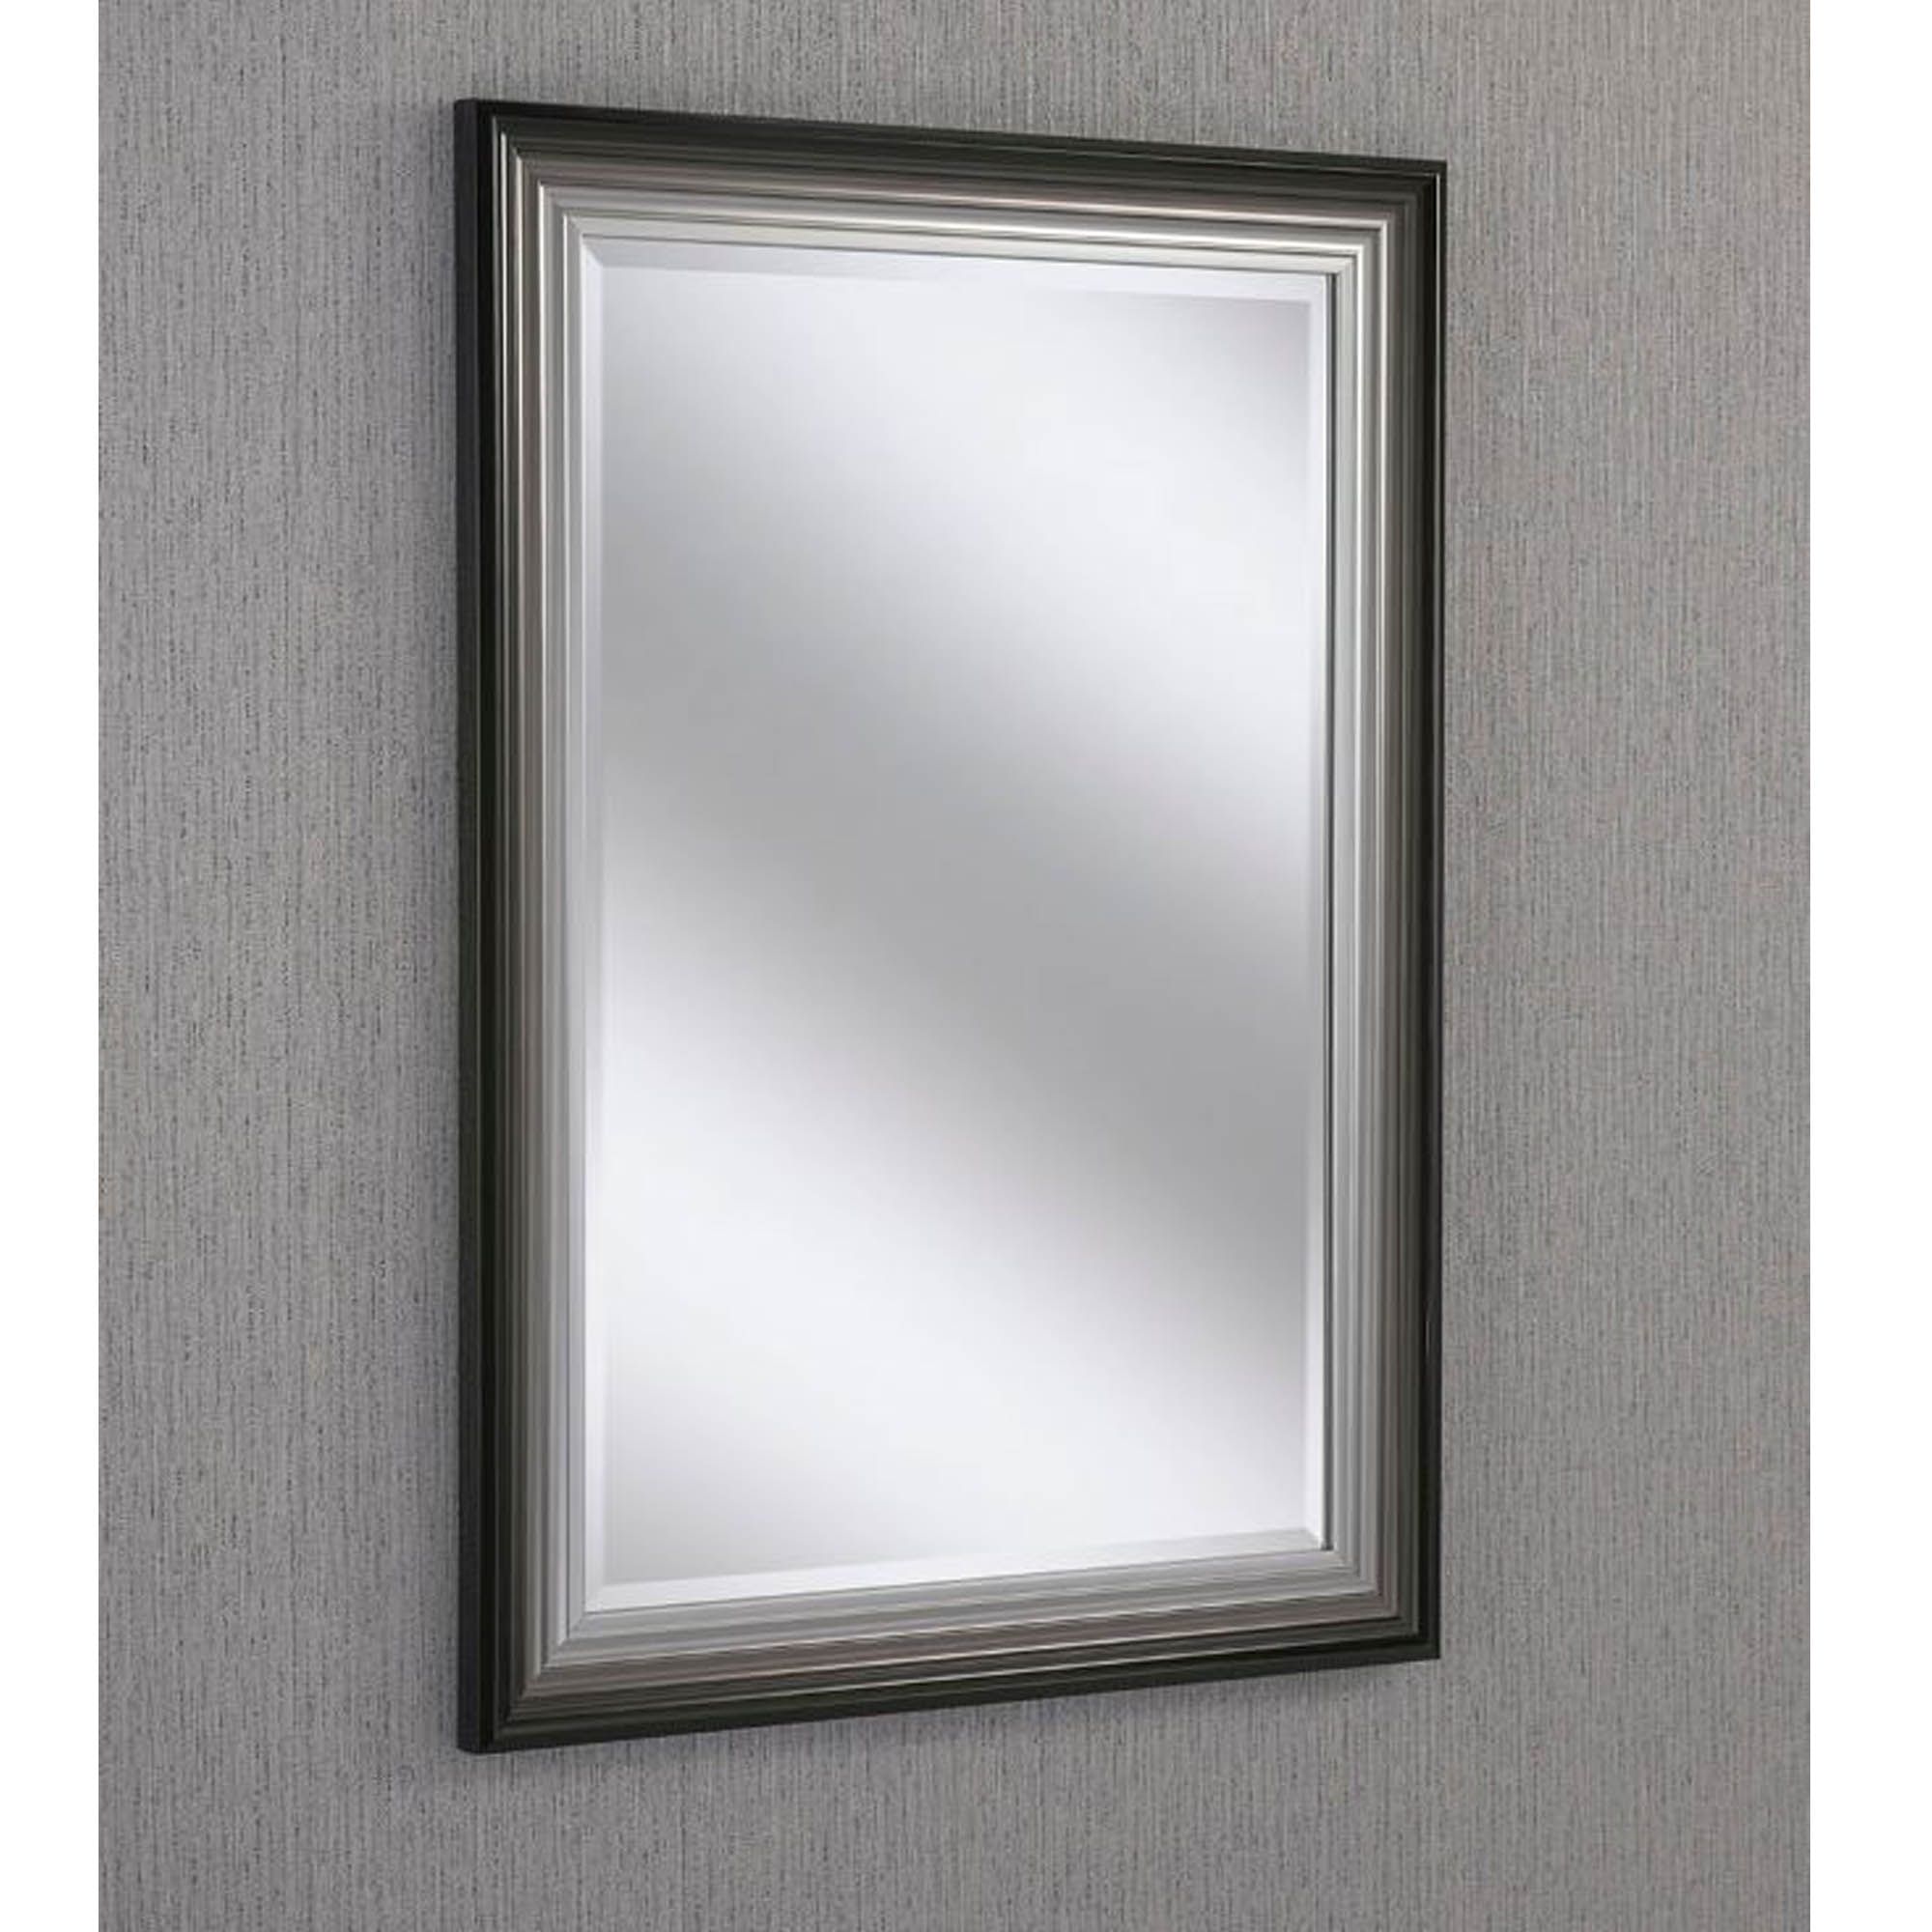 Rectangular Black/silver Beveled Contemporary Wall Mirror | Hd365 With Black Beaded Rectangular Wall Mirrors (View 13 of 15)